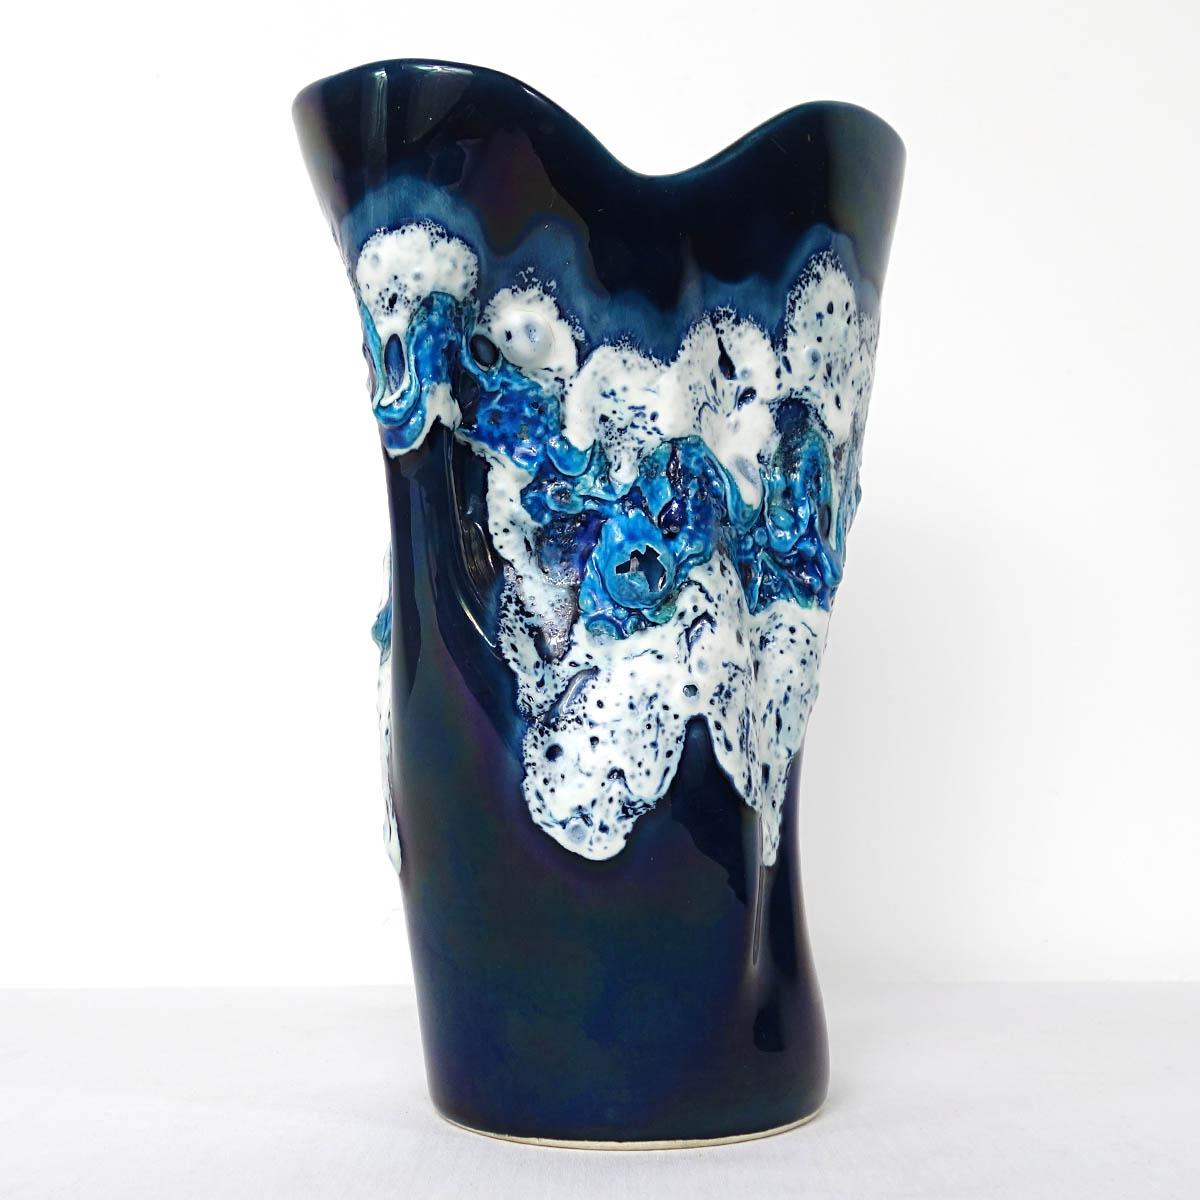 Mid-20th Century Mid-Century Modern Blue Vase by French Ceramics Specialist Vallauris